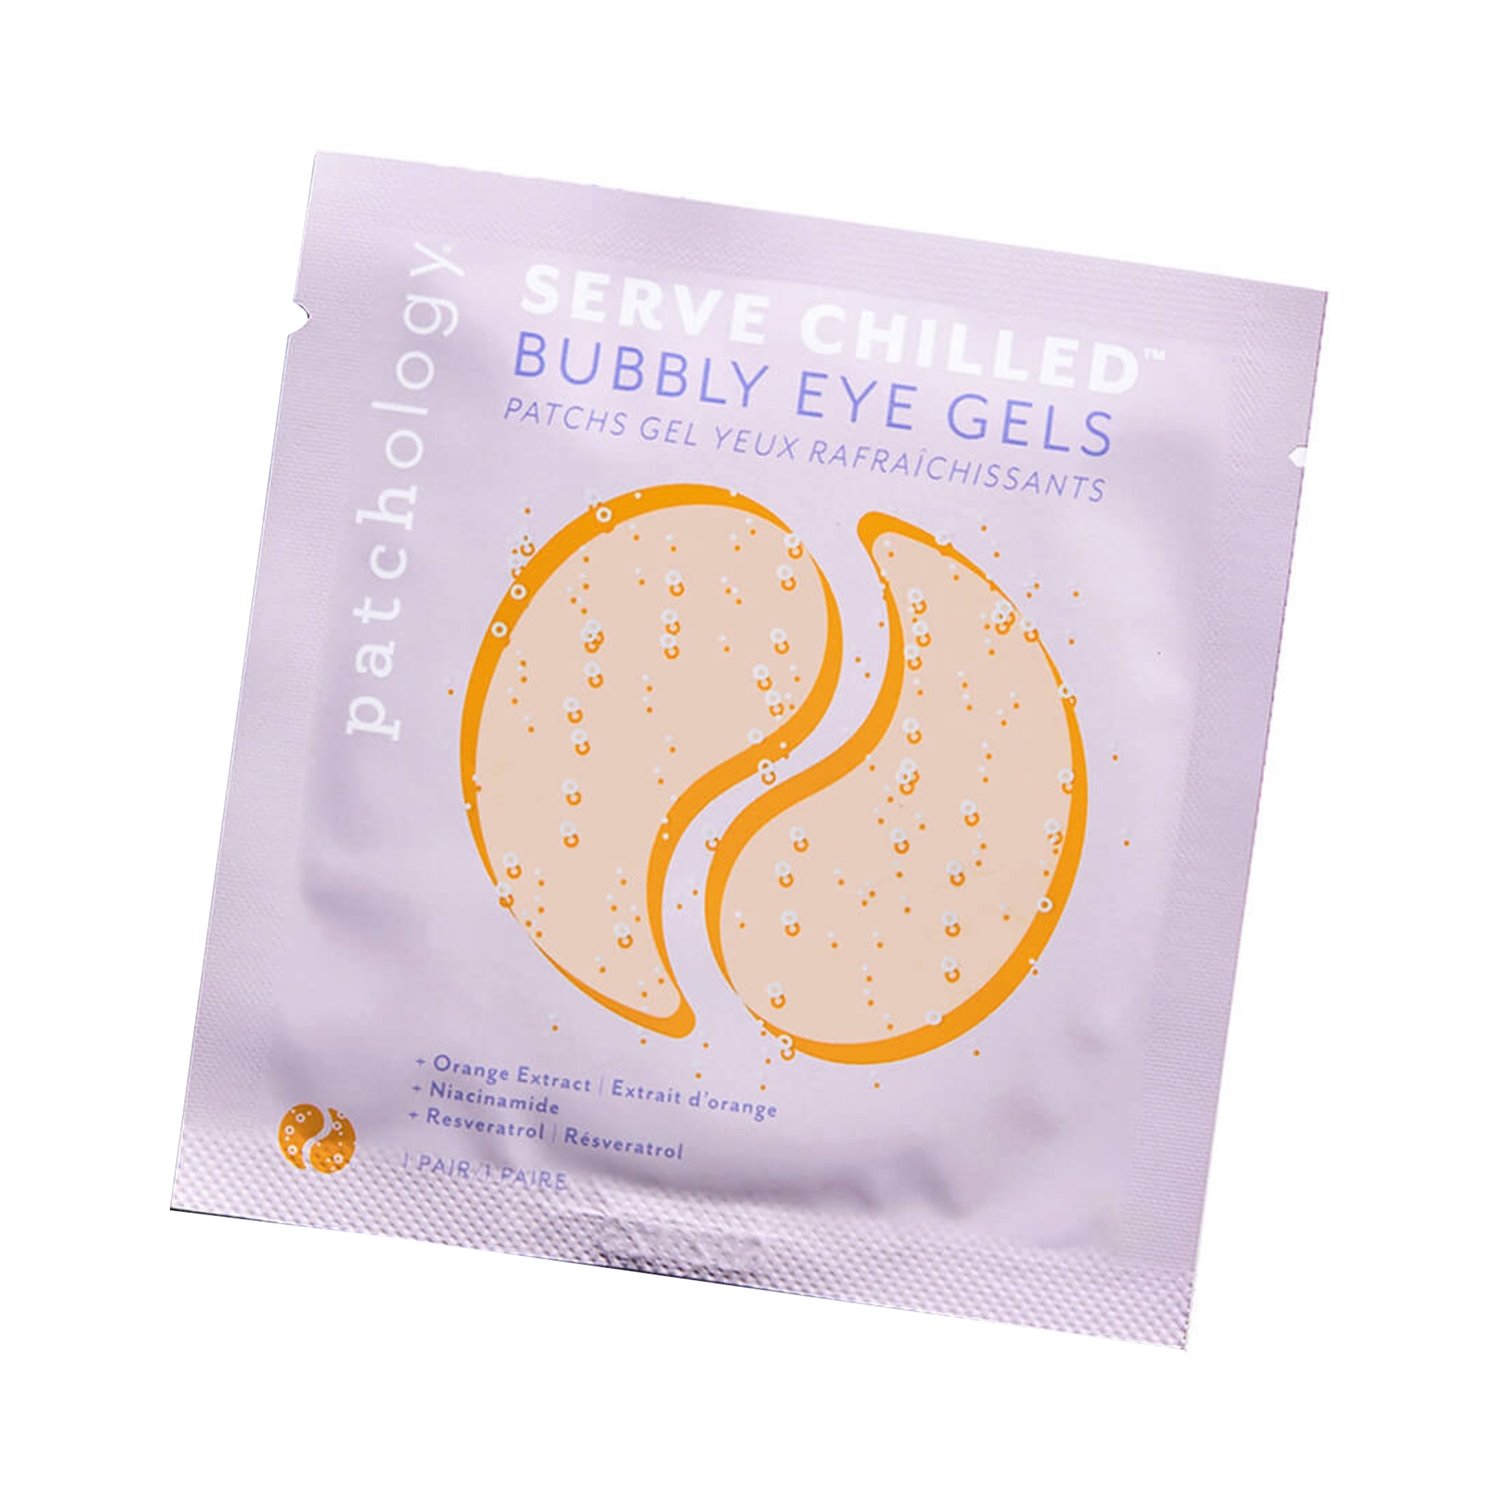 Patchology Serve Chilled Bubbly Eye Gel Patches